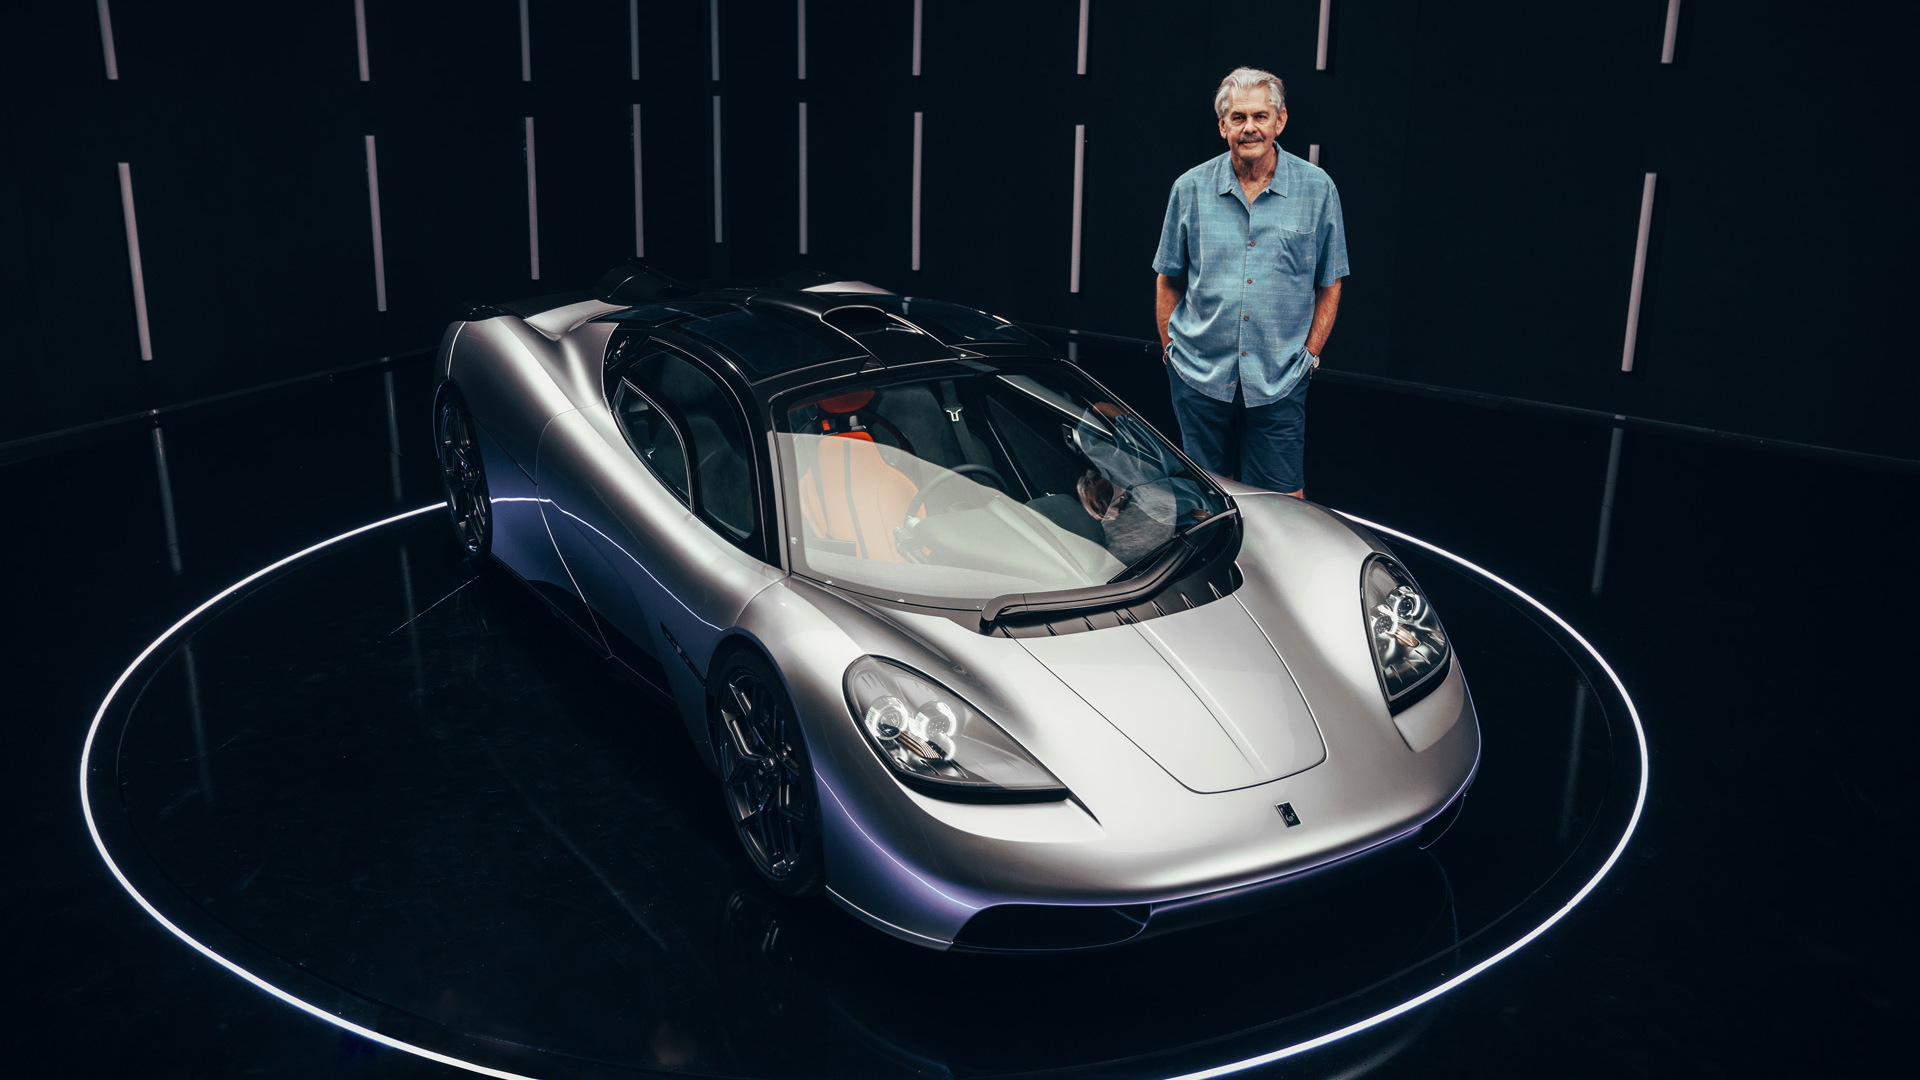 Gordon Murray and the T.50